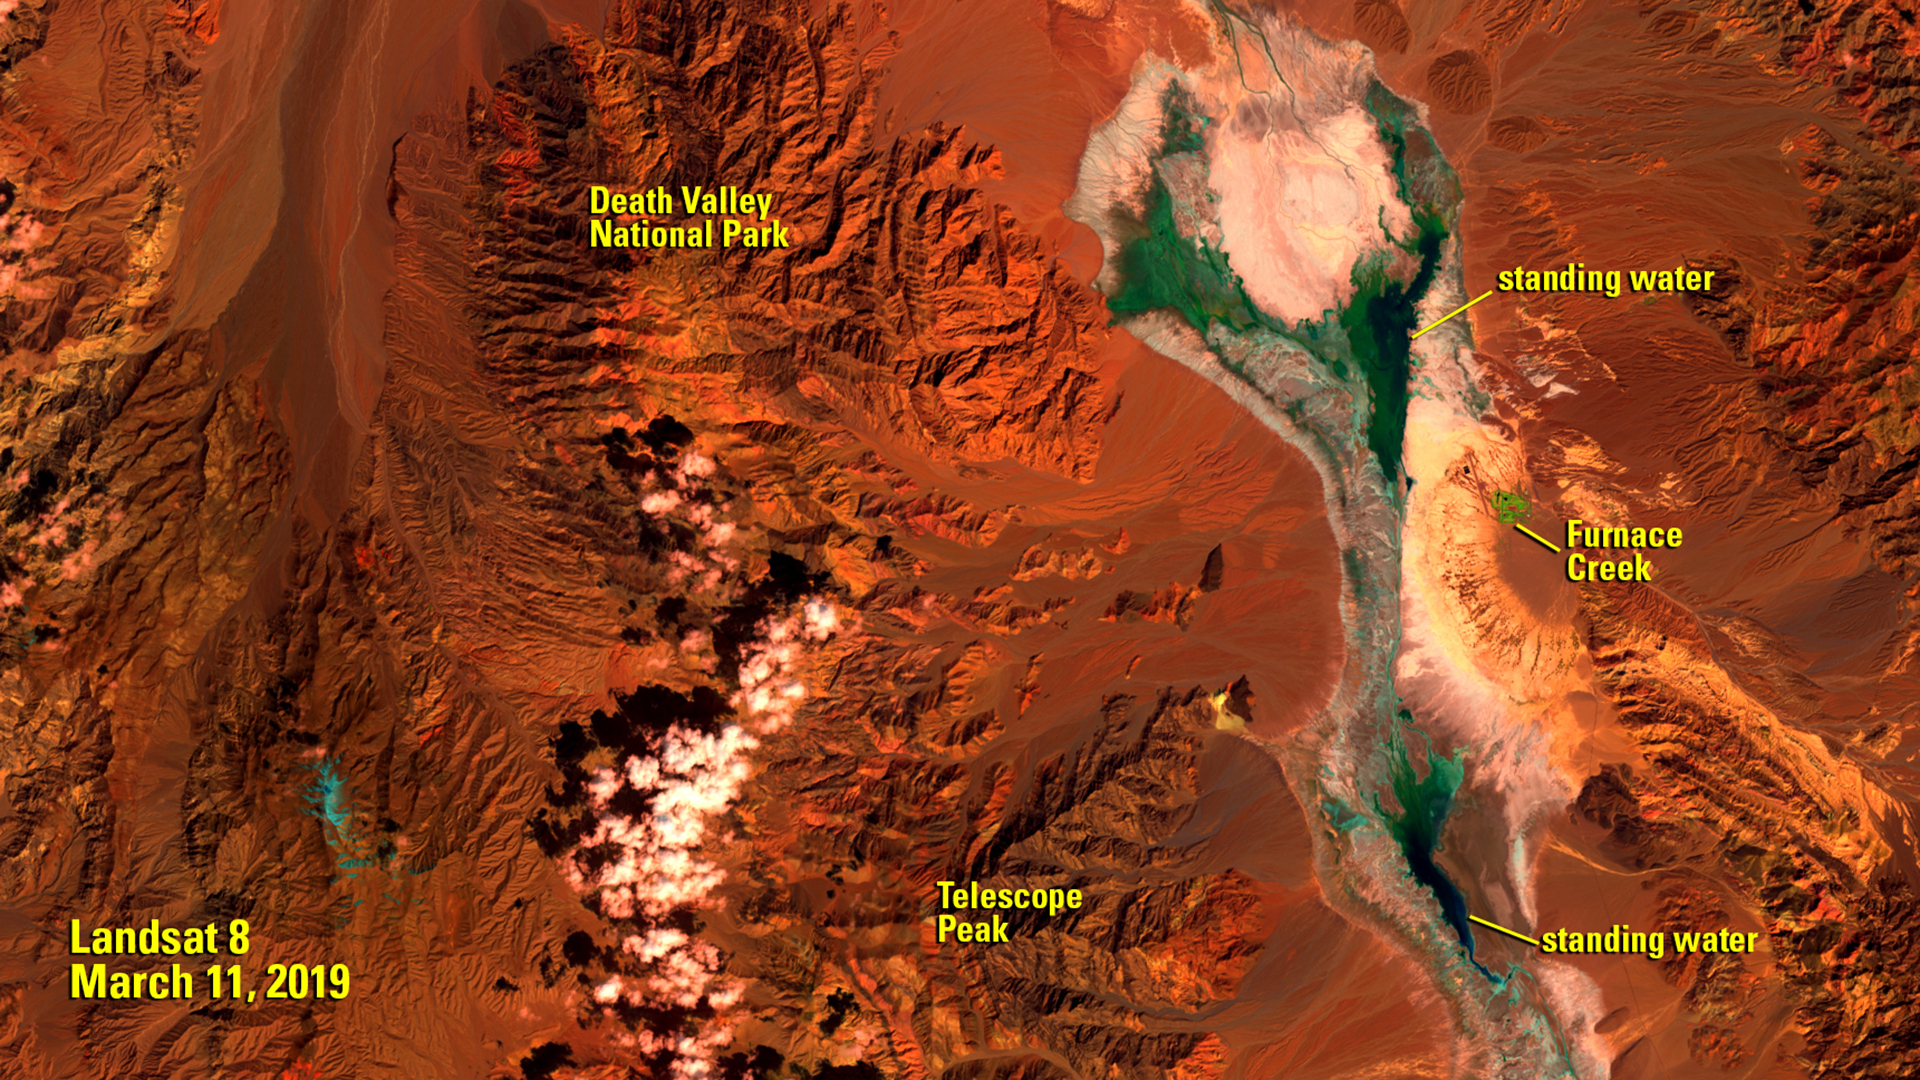 Landsat image of Death Valley, CA from March 11, 2019